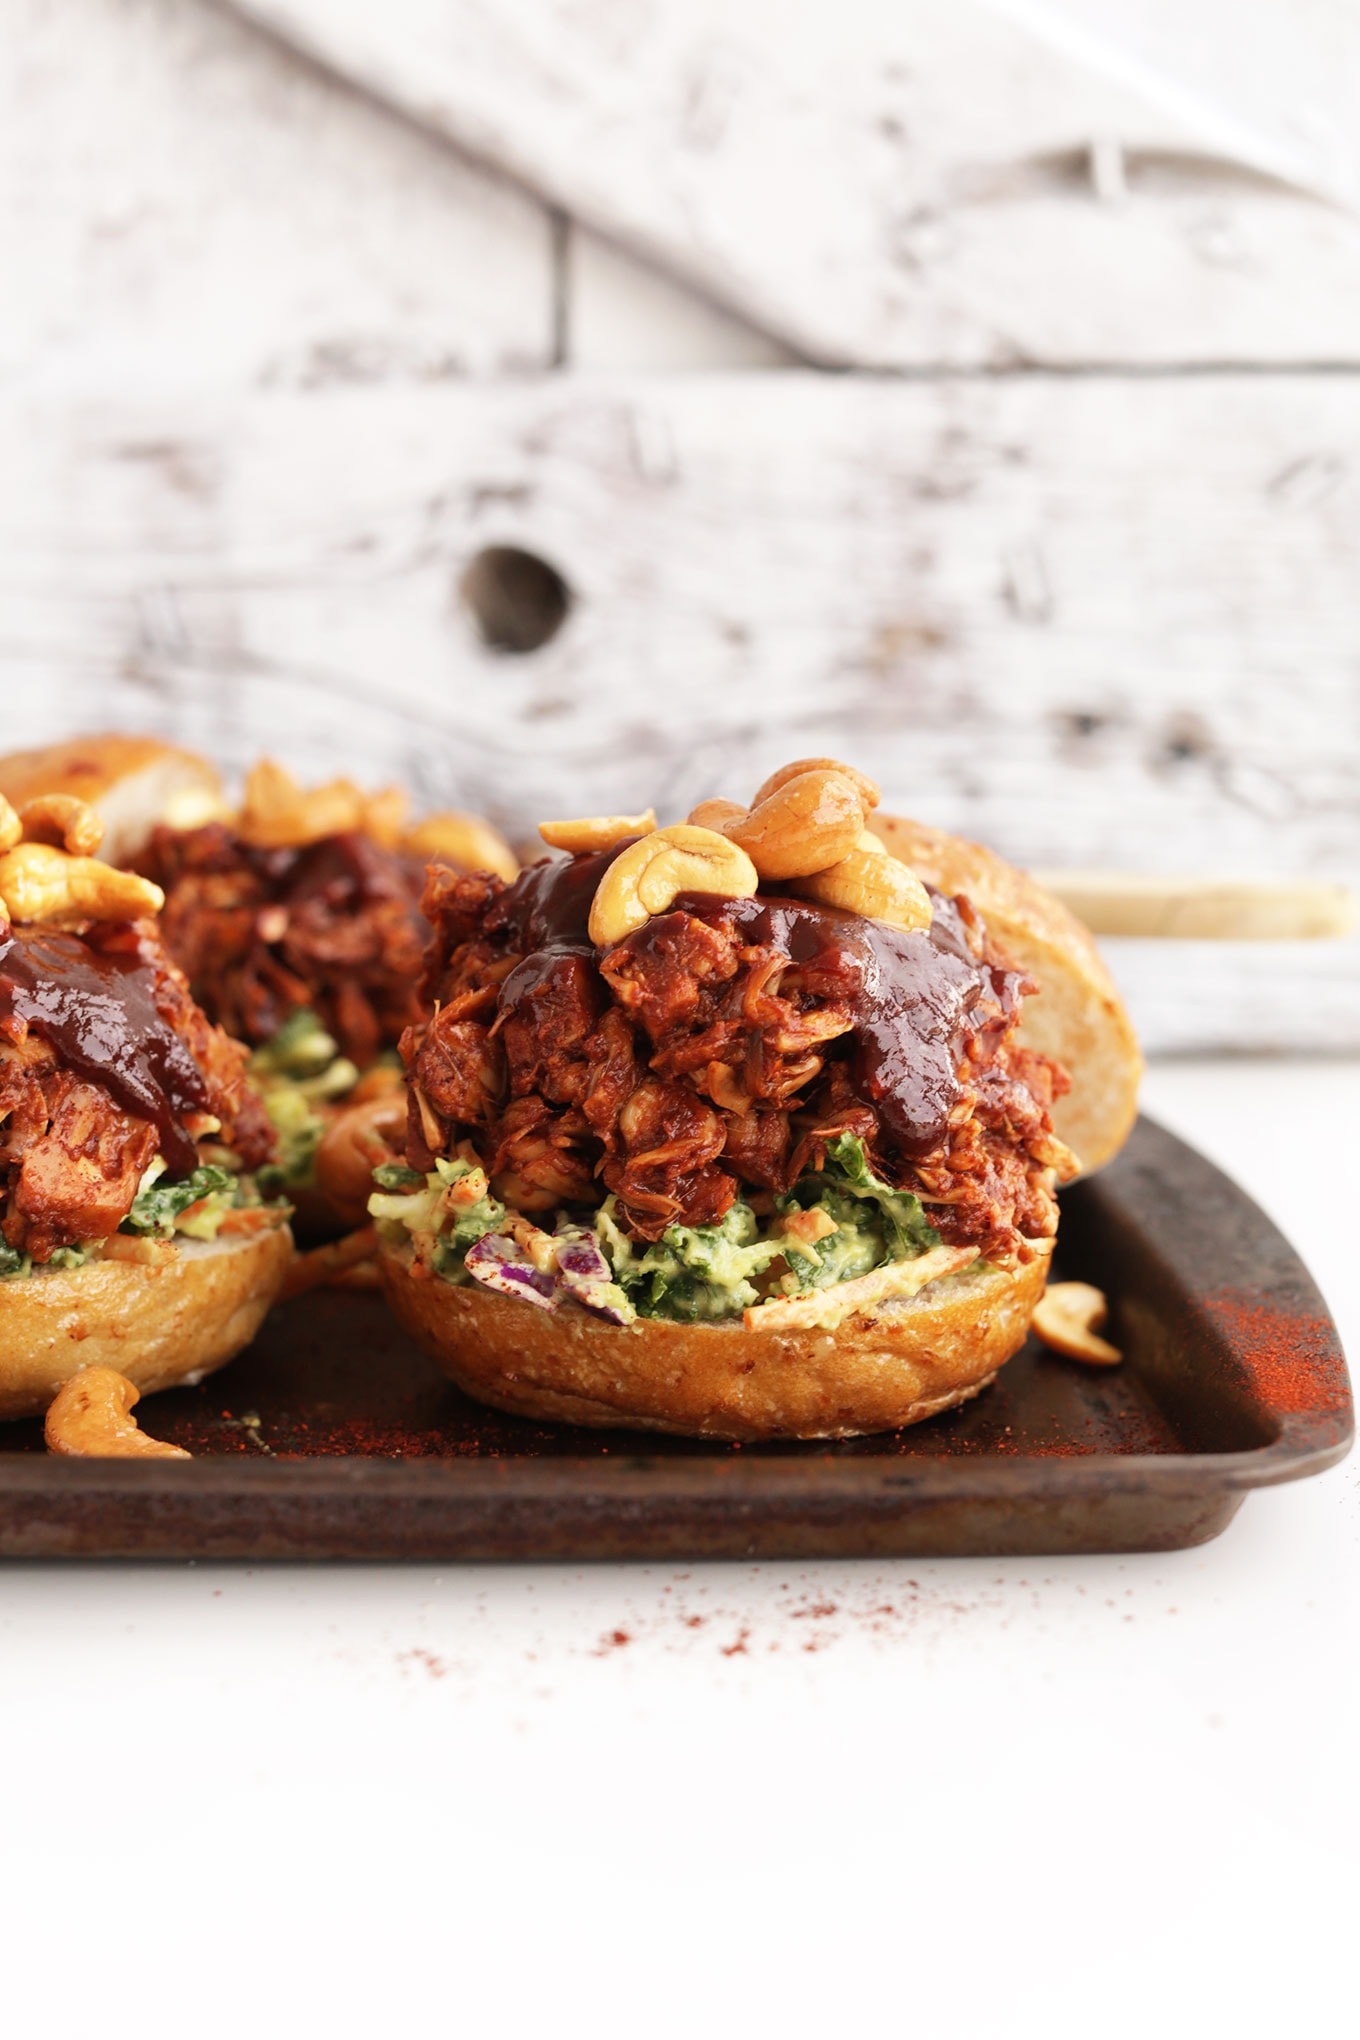 Sandwich with BBQ flavored jackfruit filling with dressing and nuts.